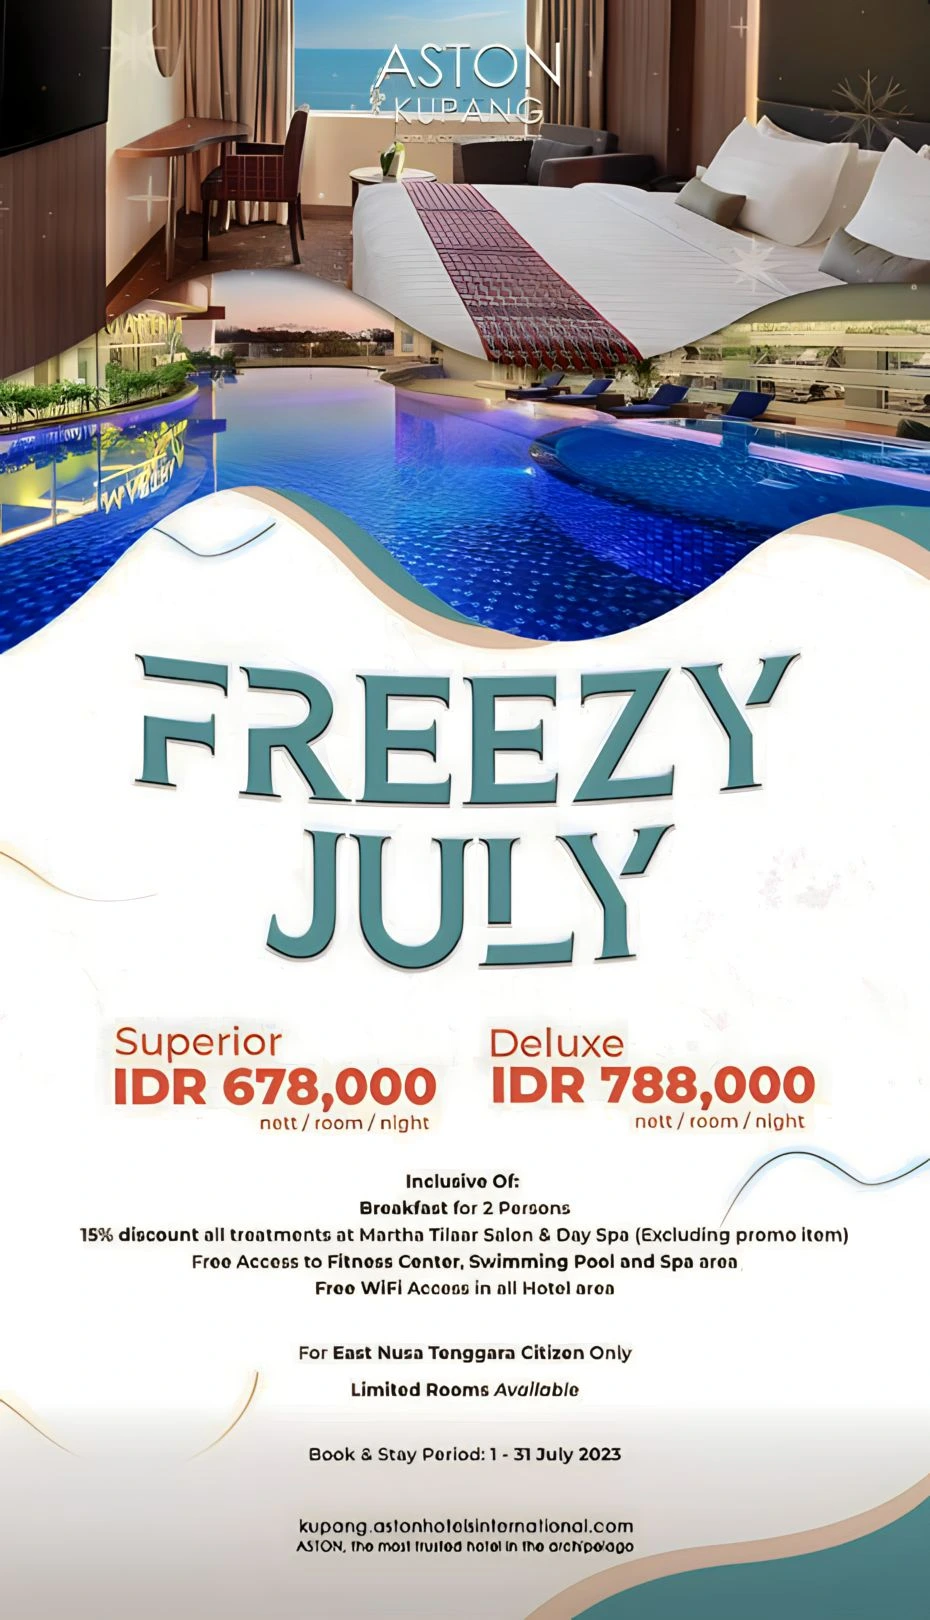 Promo Freezy July di Aston Kupang Hotel and Convention Center